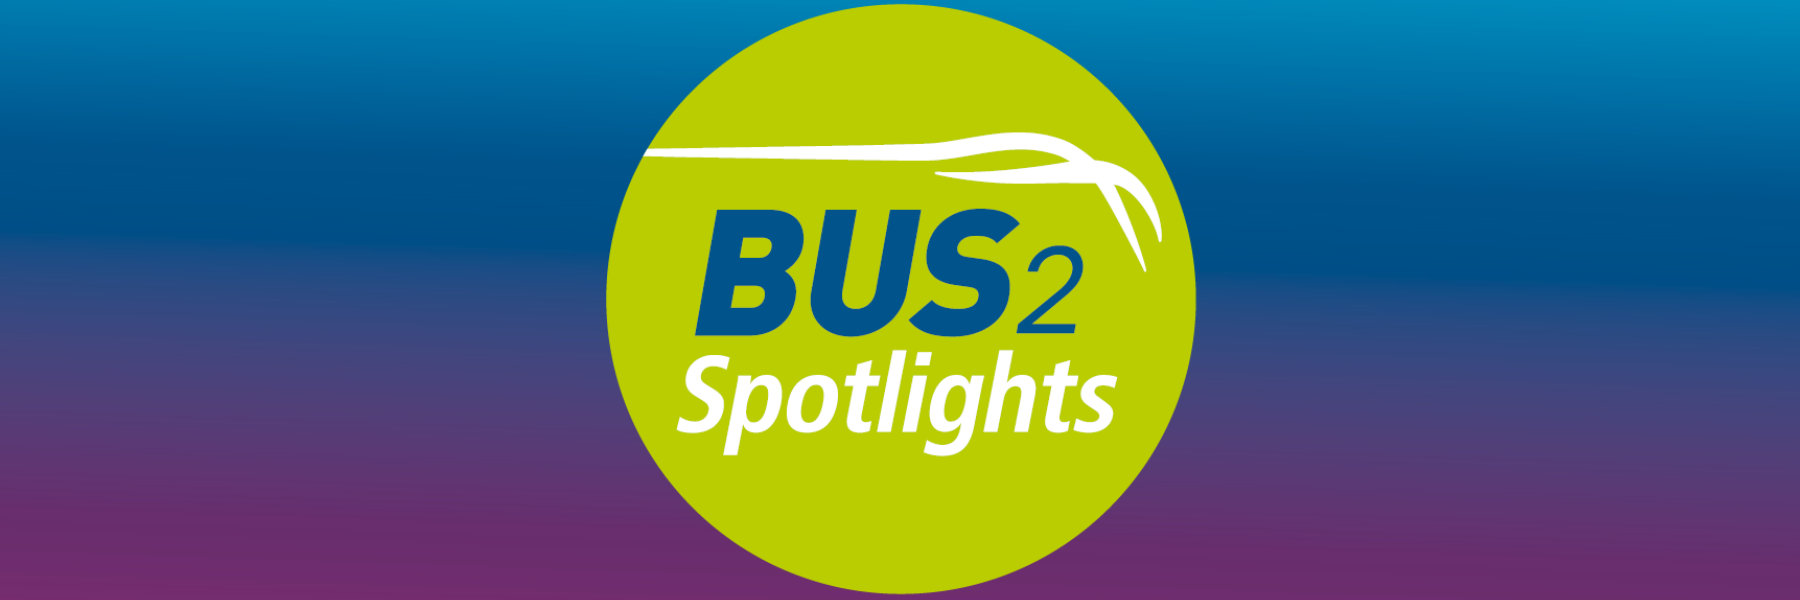 The round BUS2Spotlights logo is shown in the colours green, white and blue. 